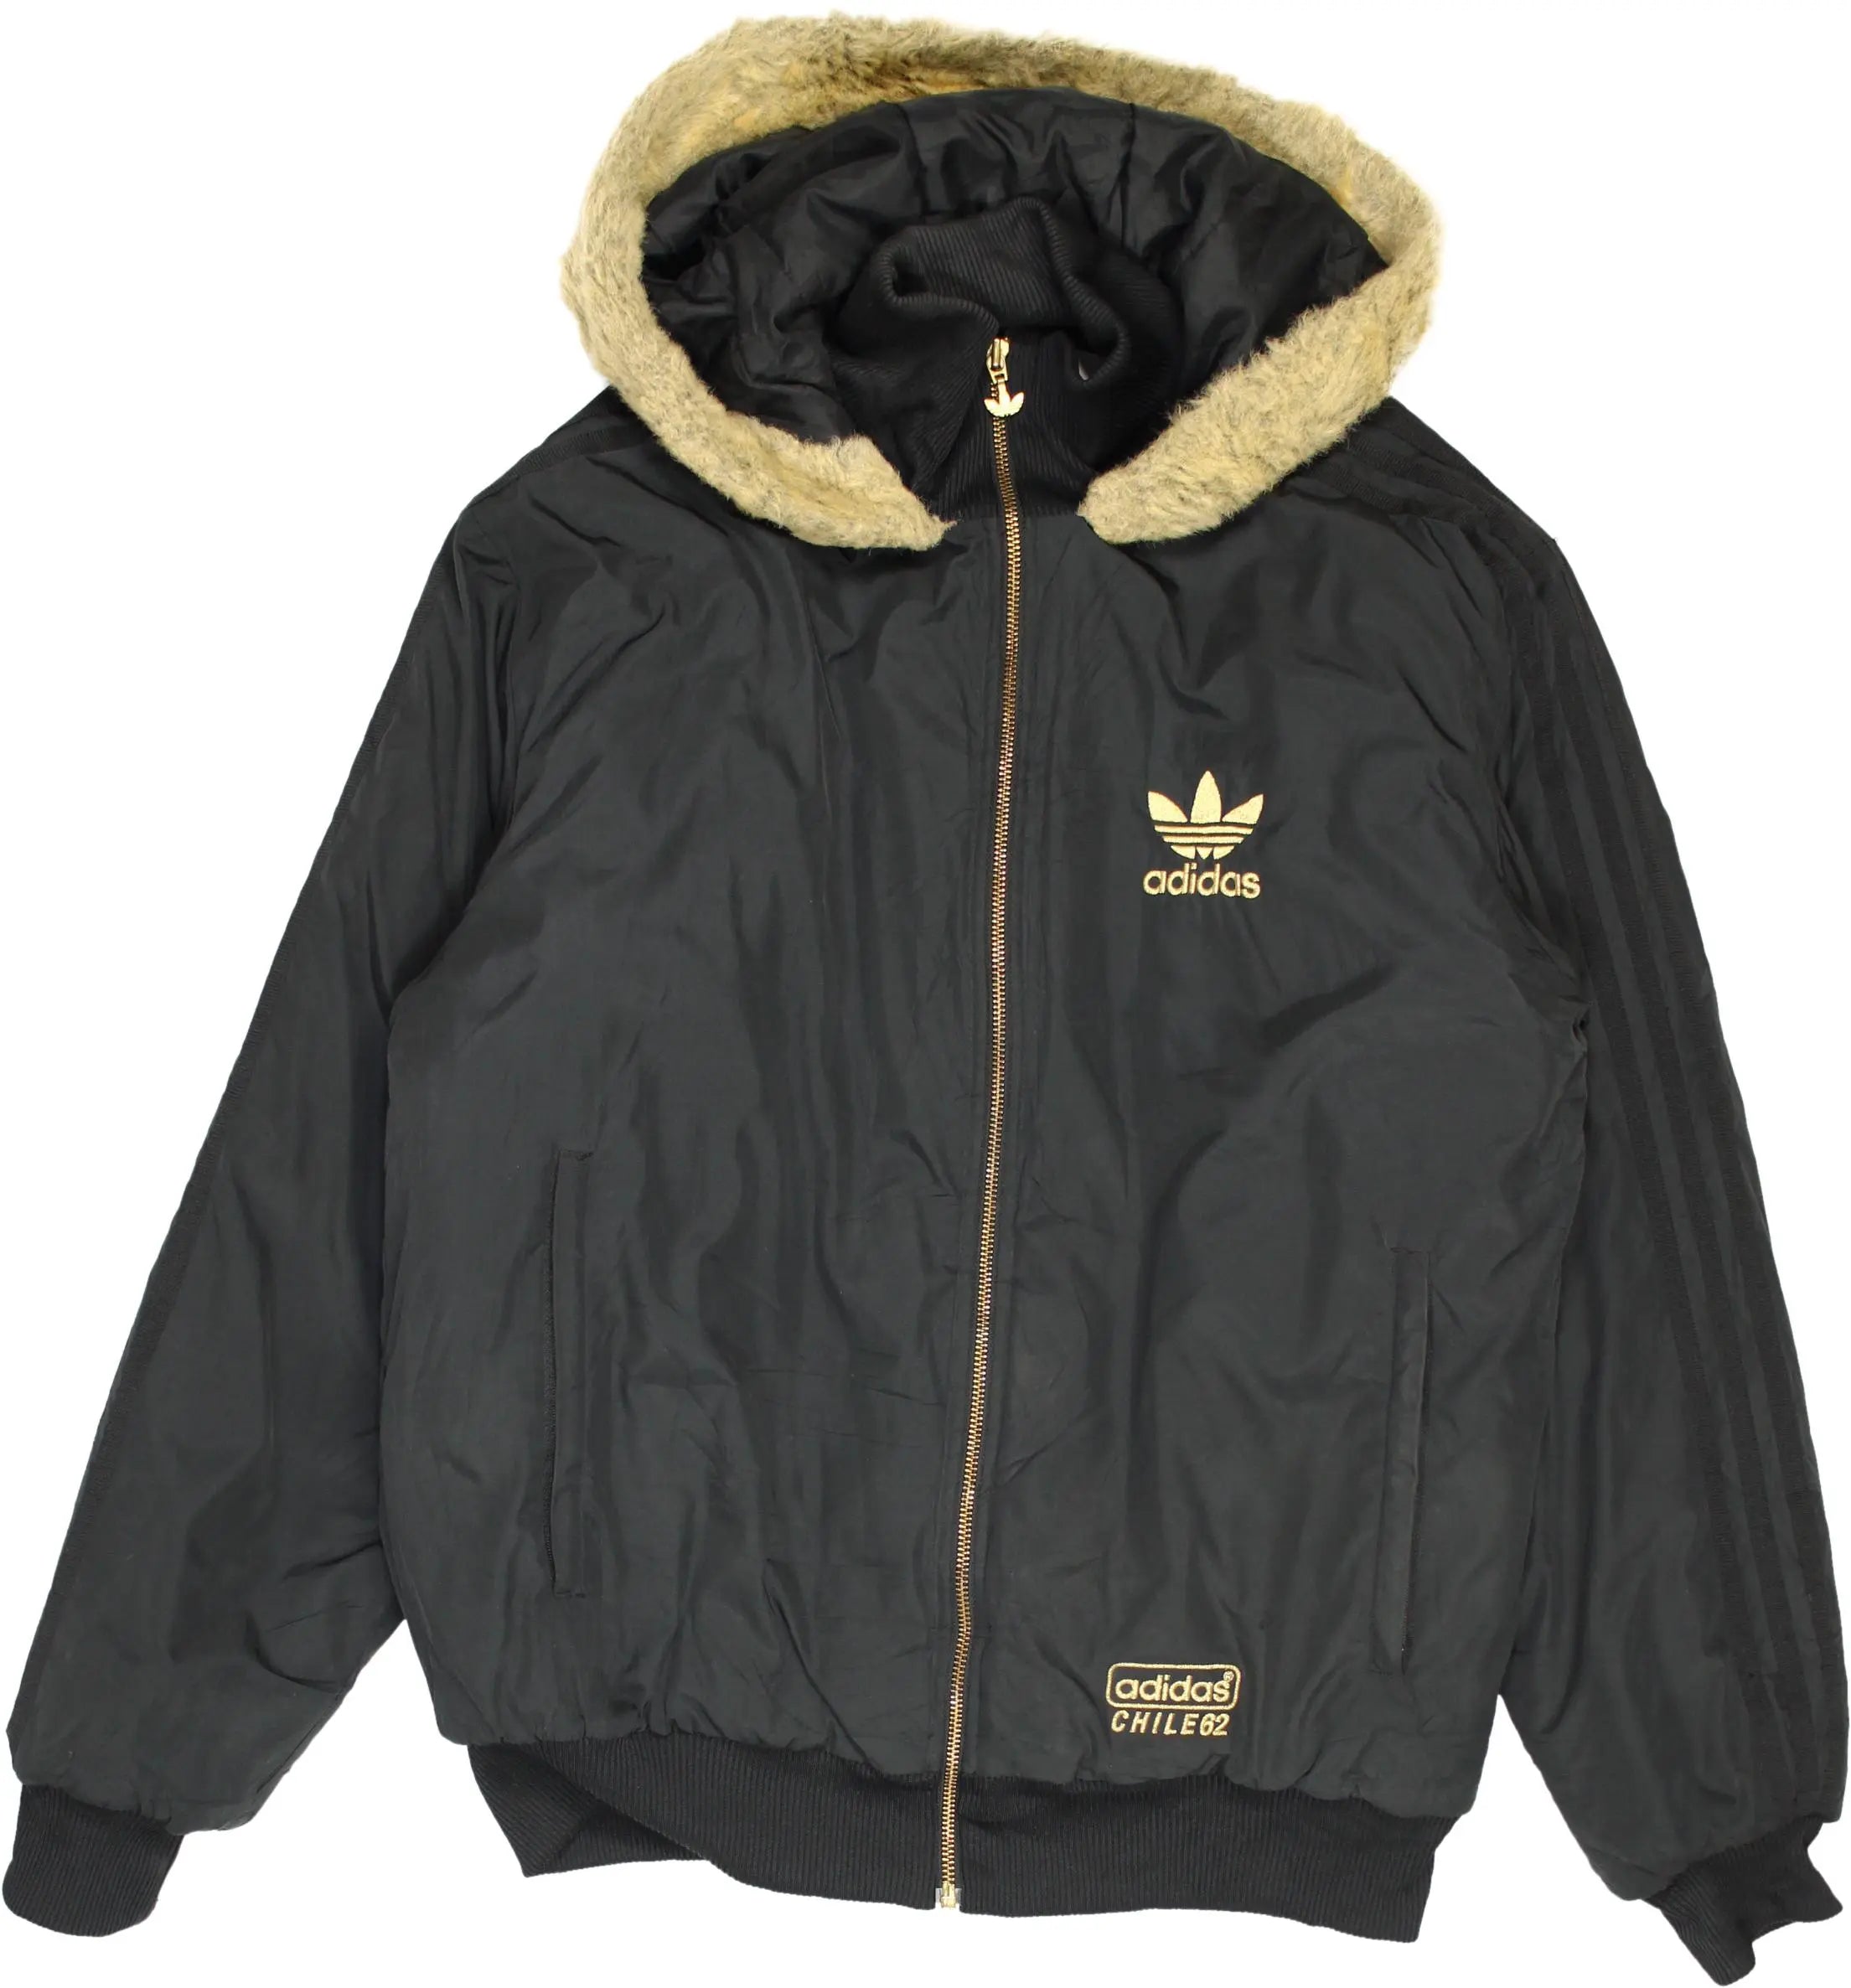 Adidas - 00s Jacket with Hoodie by Adidas- ThriftTale.com - Vintage and second handclothing